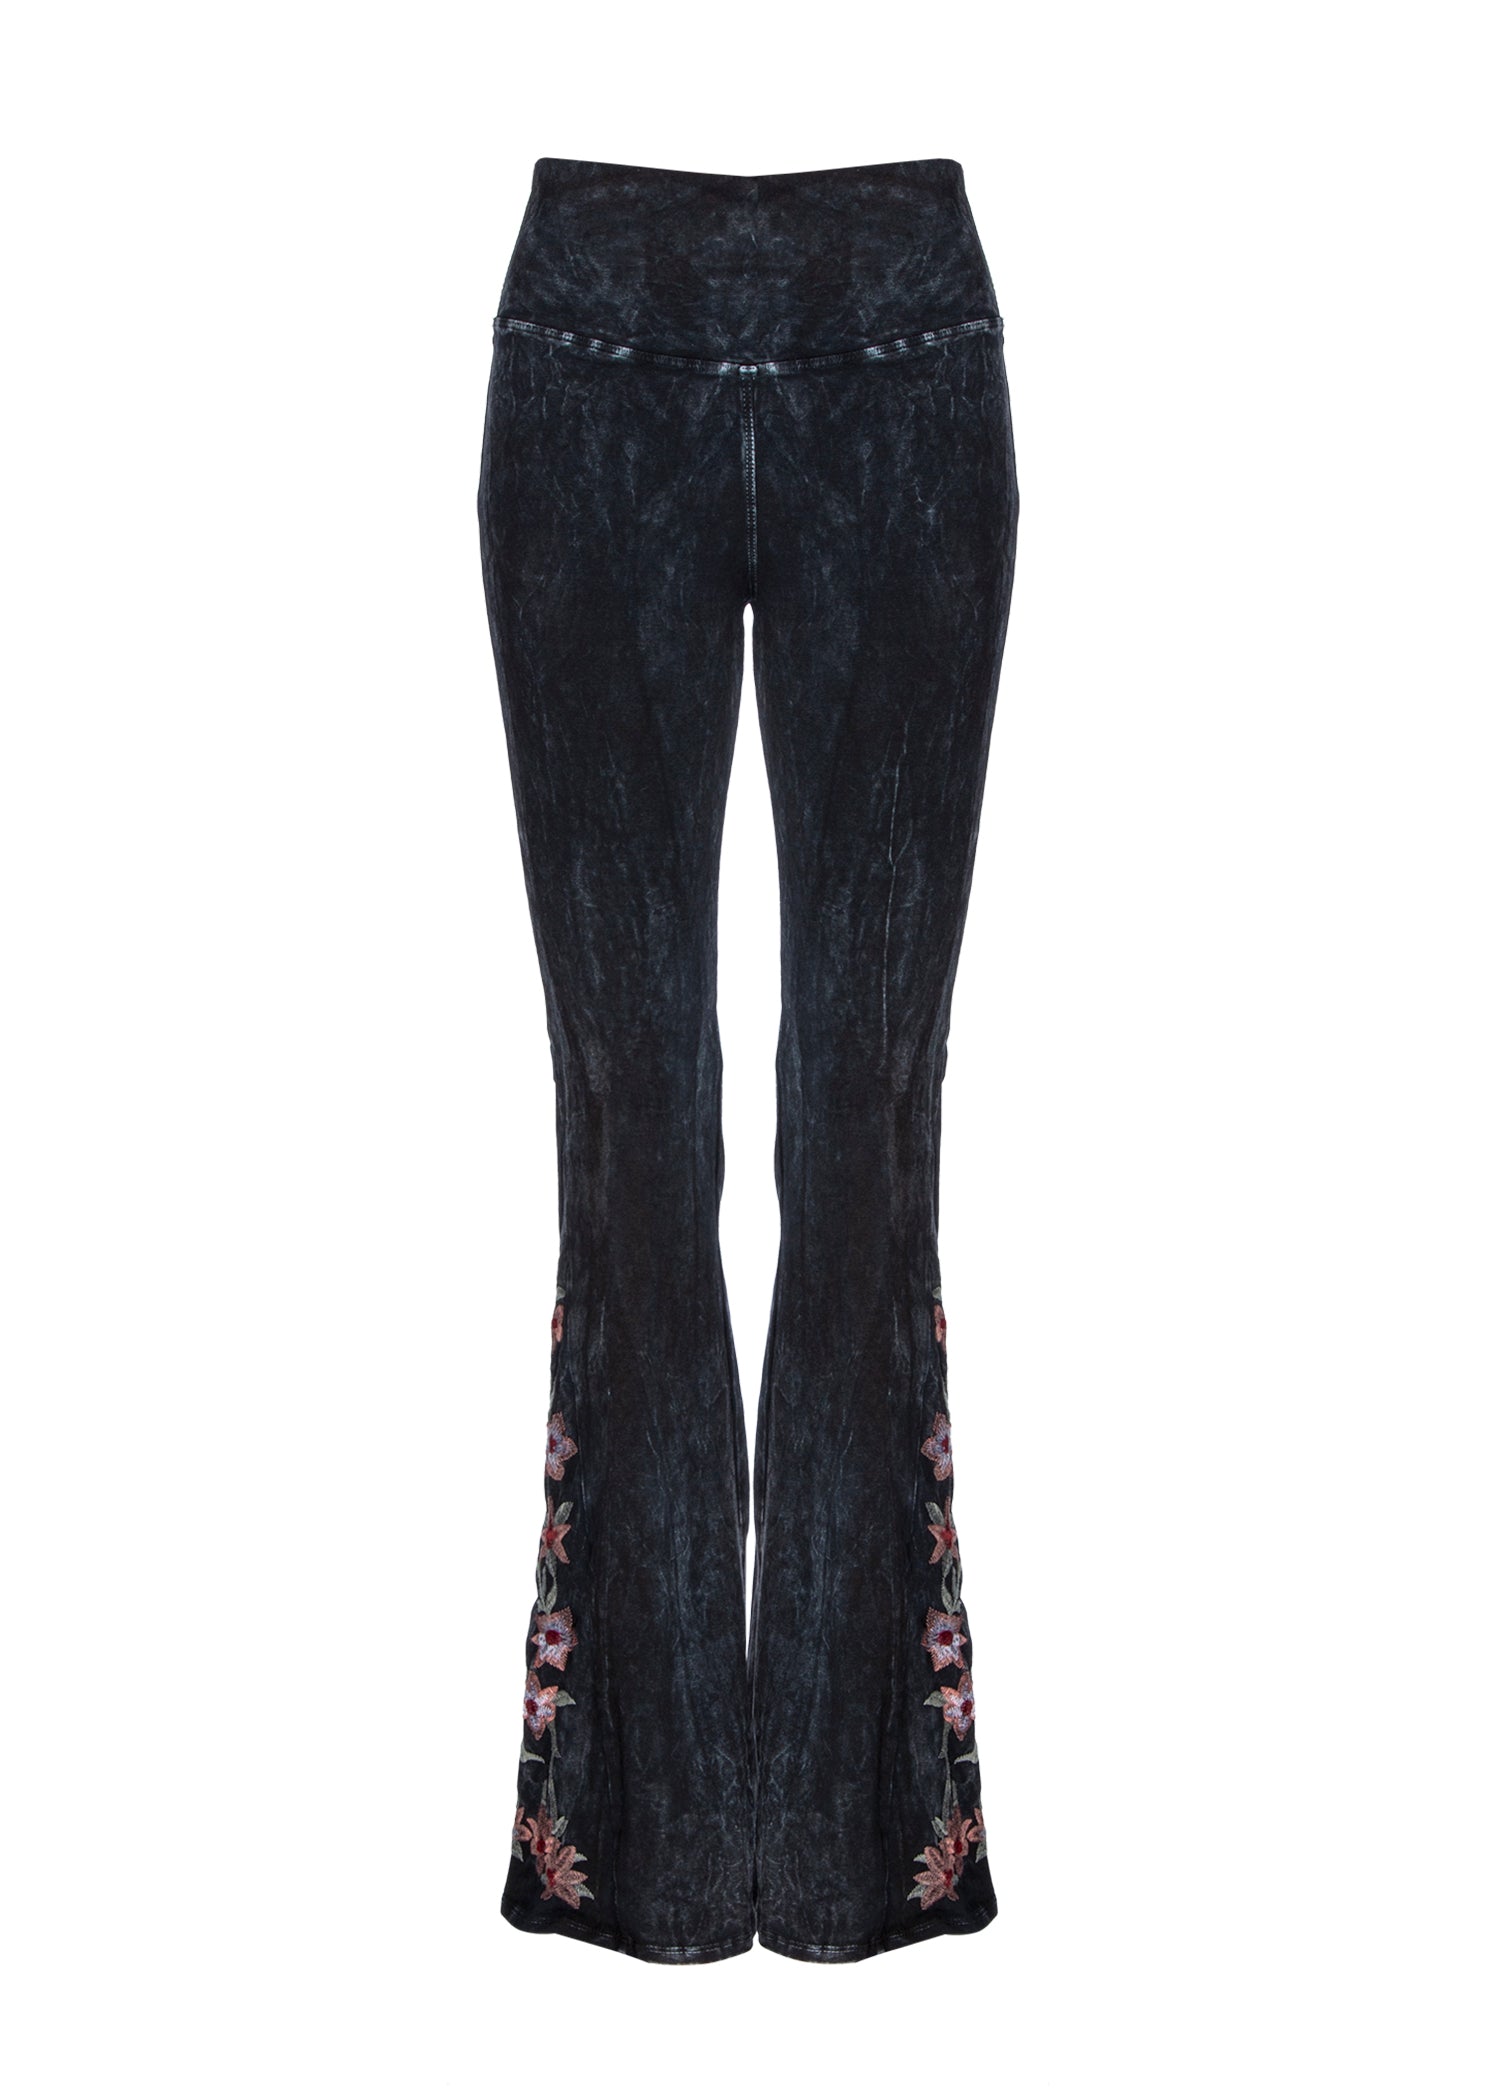 Floral Bell Bottoms | Floral Flare Pants | Floral Palazzo Pants ...